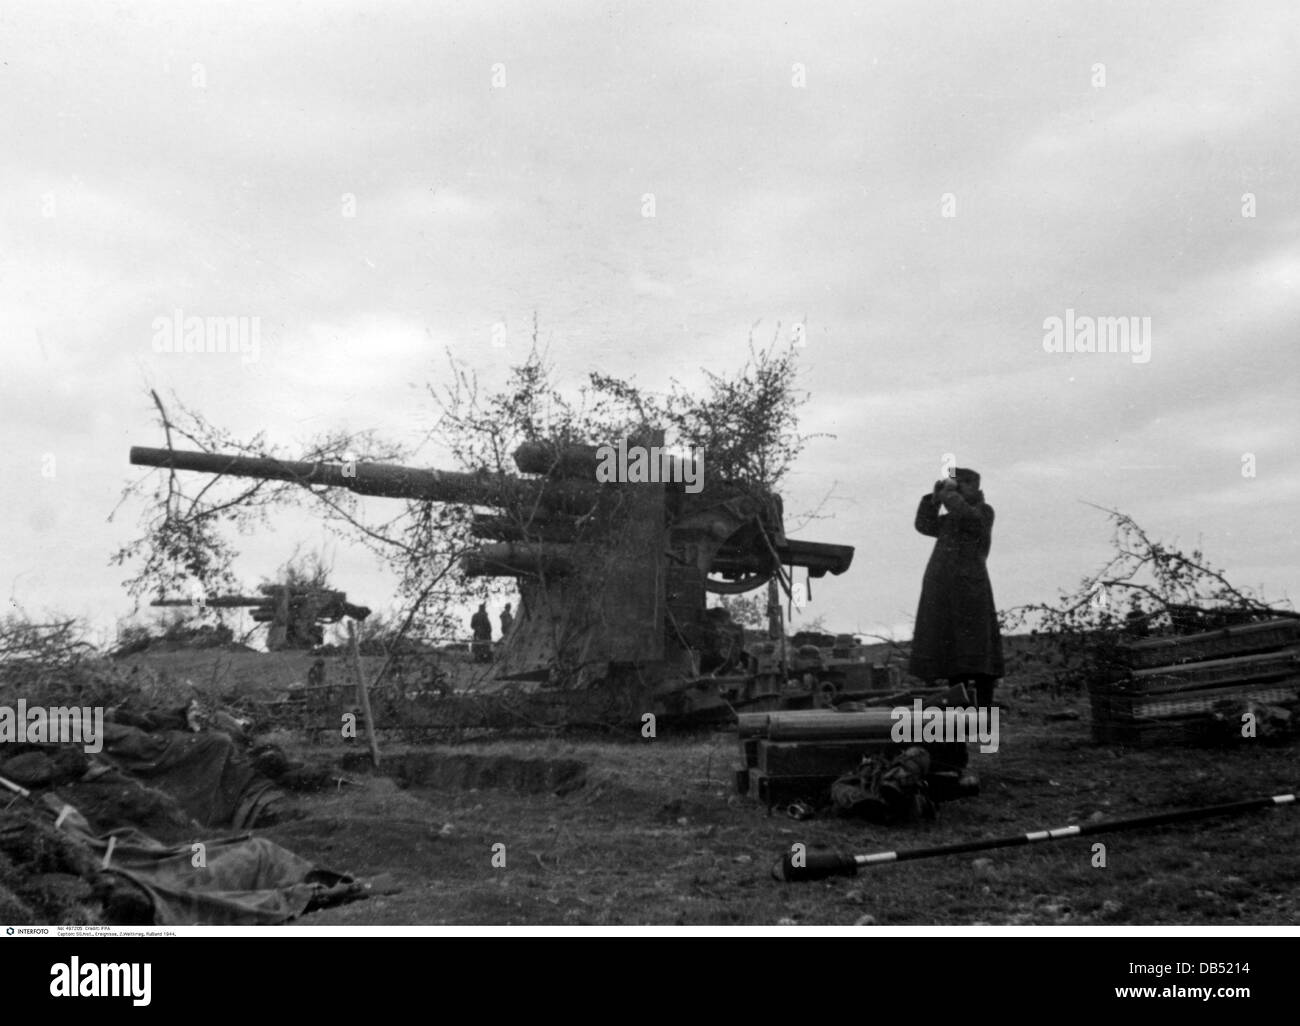 events, Second World War / WWII, Russia 1944 / 1945, Crimea, Sevastopol, German 88 mm anti-aircraft guns Flak 36/37 in firing position against ground targets, 30.4.1944, Eastern Front, USSR, Wehrmacht, Luftwaffe, AA, gun, artillery, emplacement, shield, 20th century, historic, historical, Soviet Union, soldiers, soldier, observing, watching, camouflage, 8.8 cm, people, 1940s, Additional-Rights-Clearences-Not Available Stock Photo